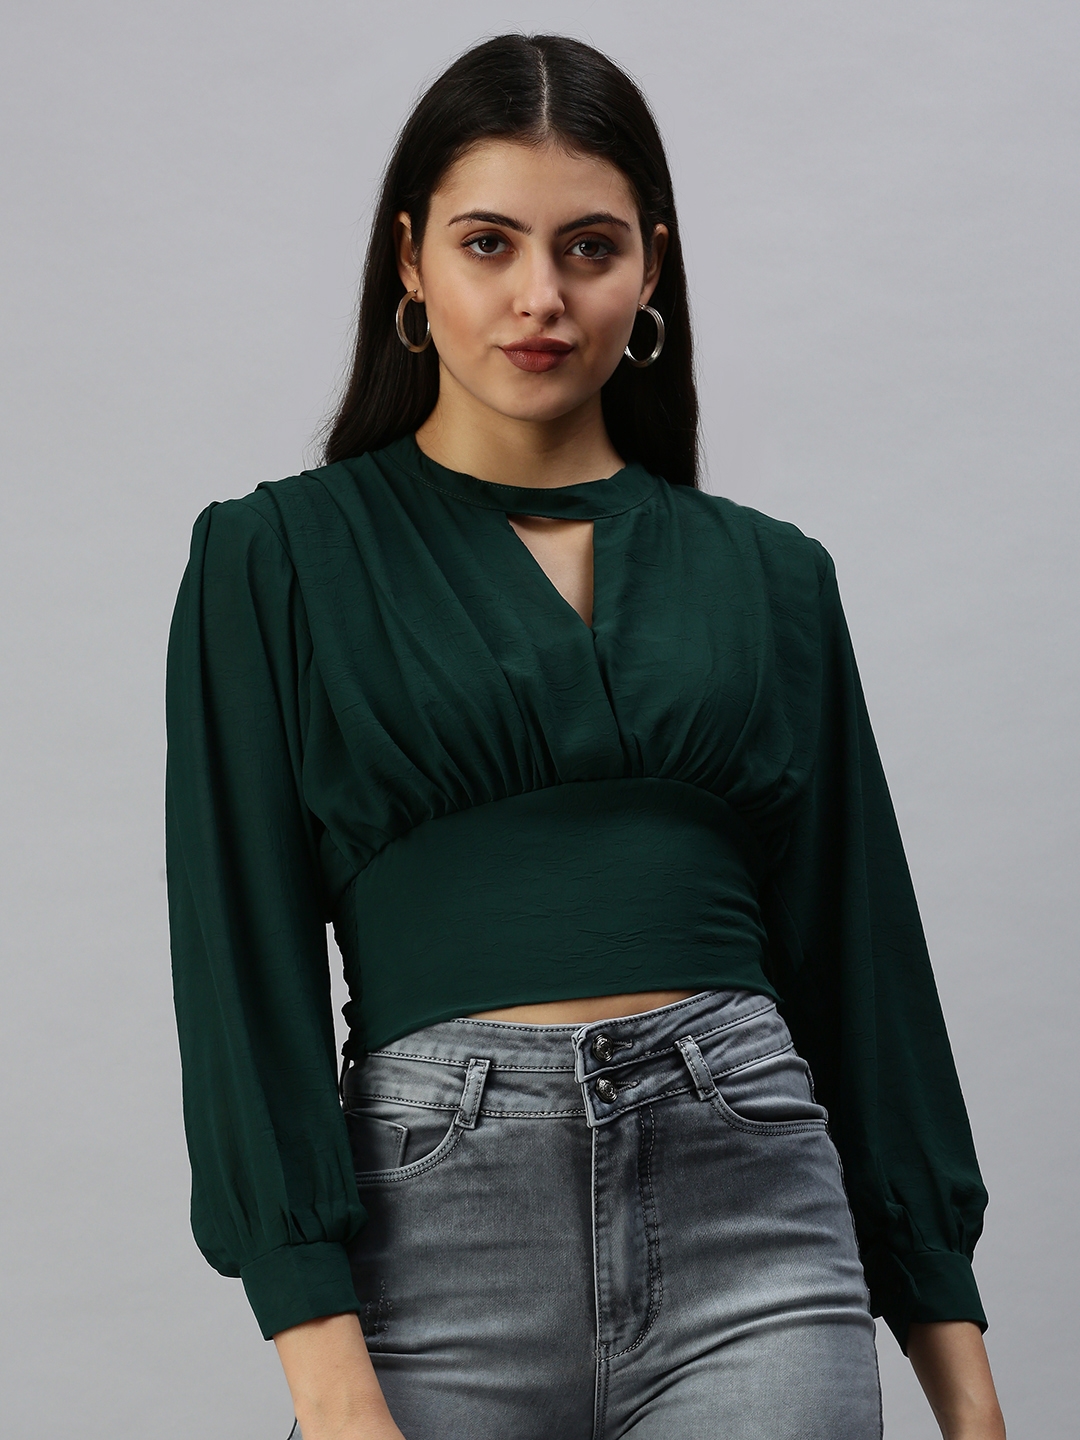 SHOWOFF Women's Long Sleeves Keyhole Neck Green Solid Top